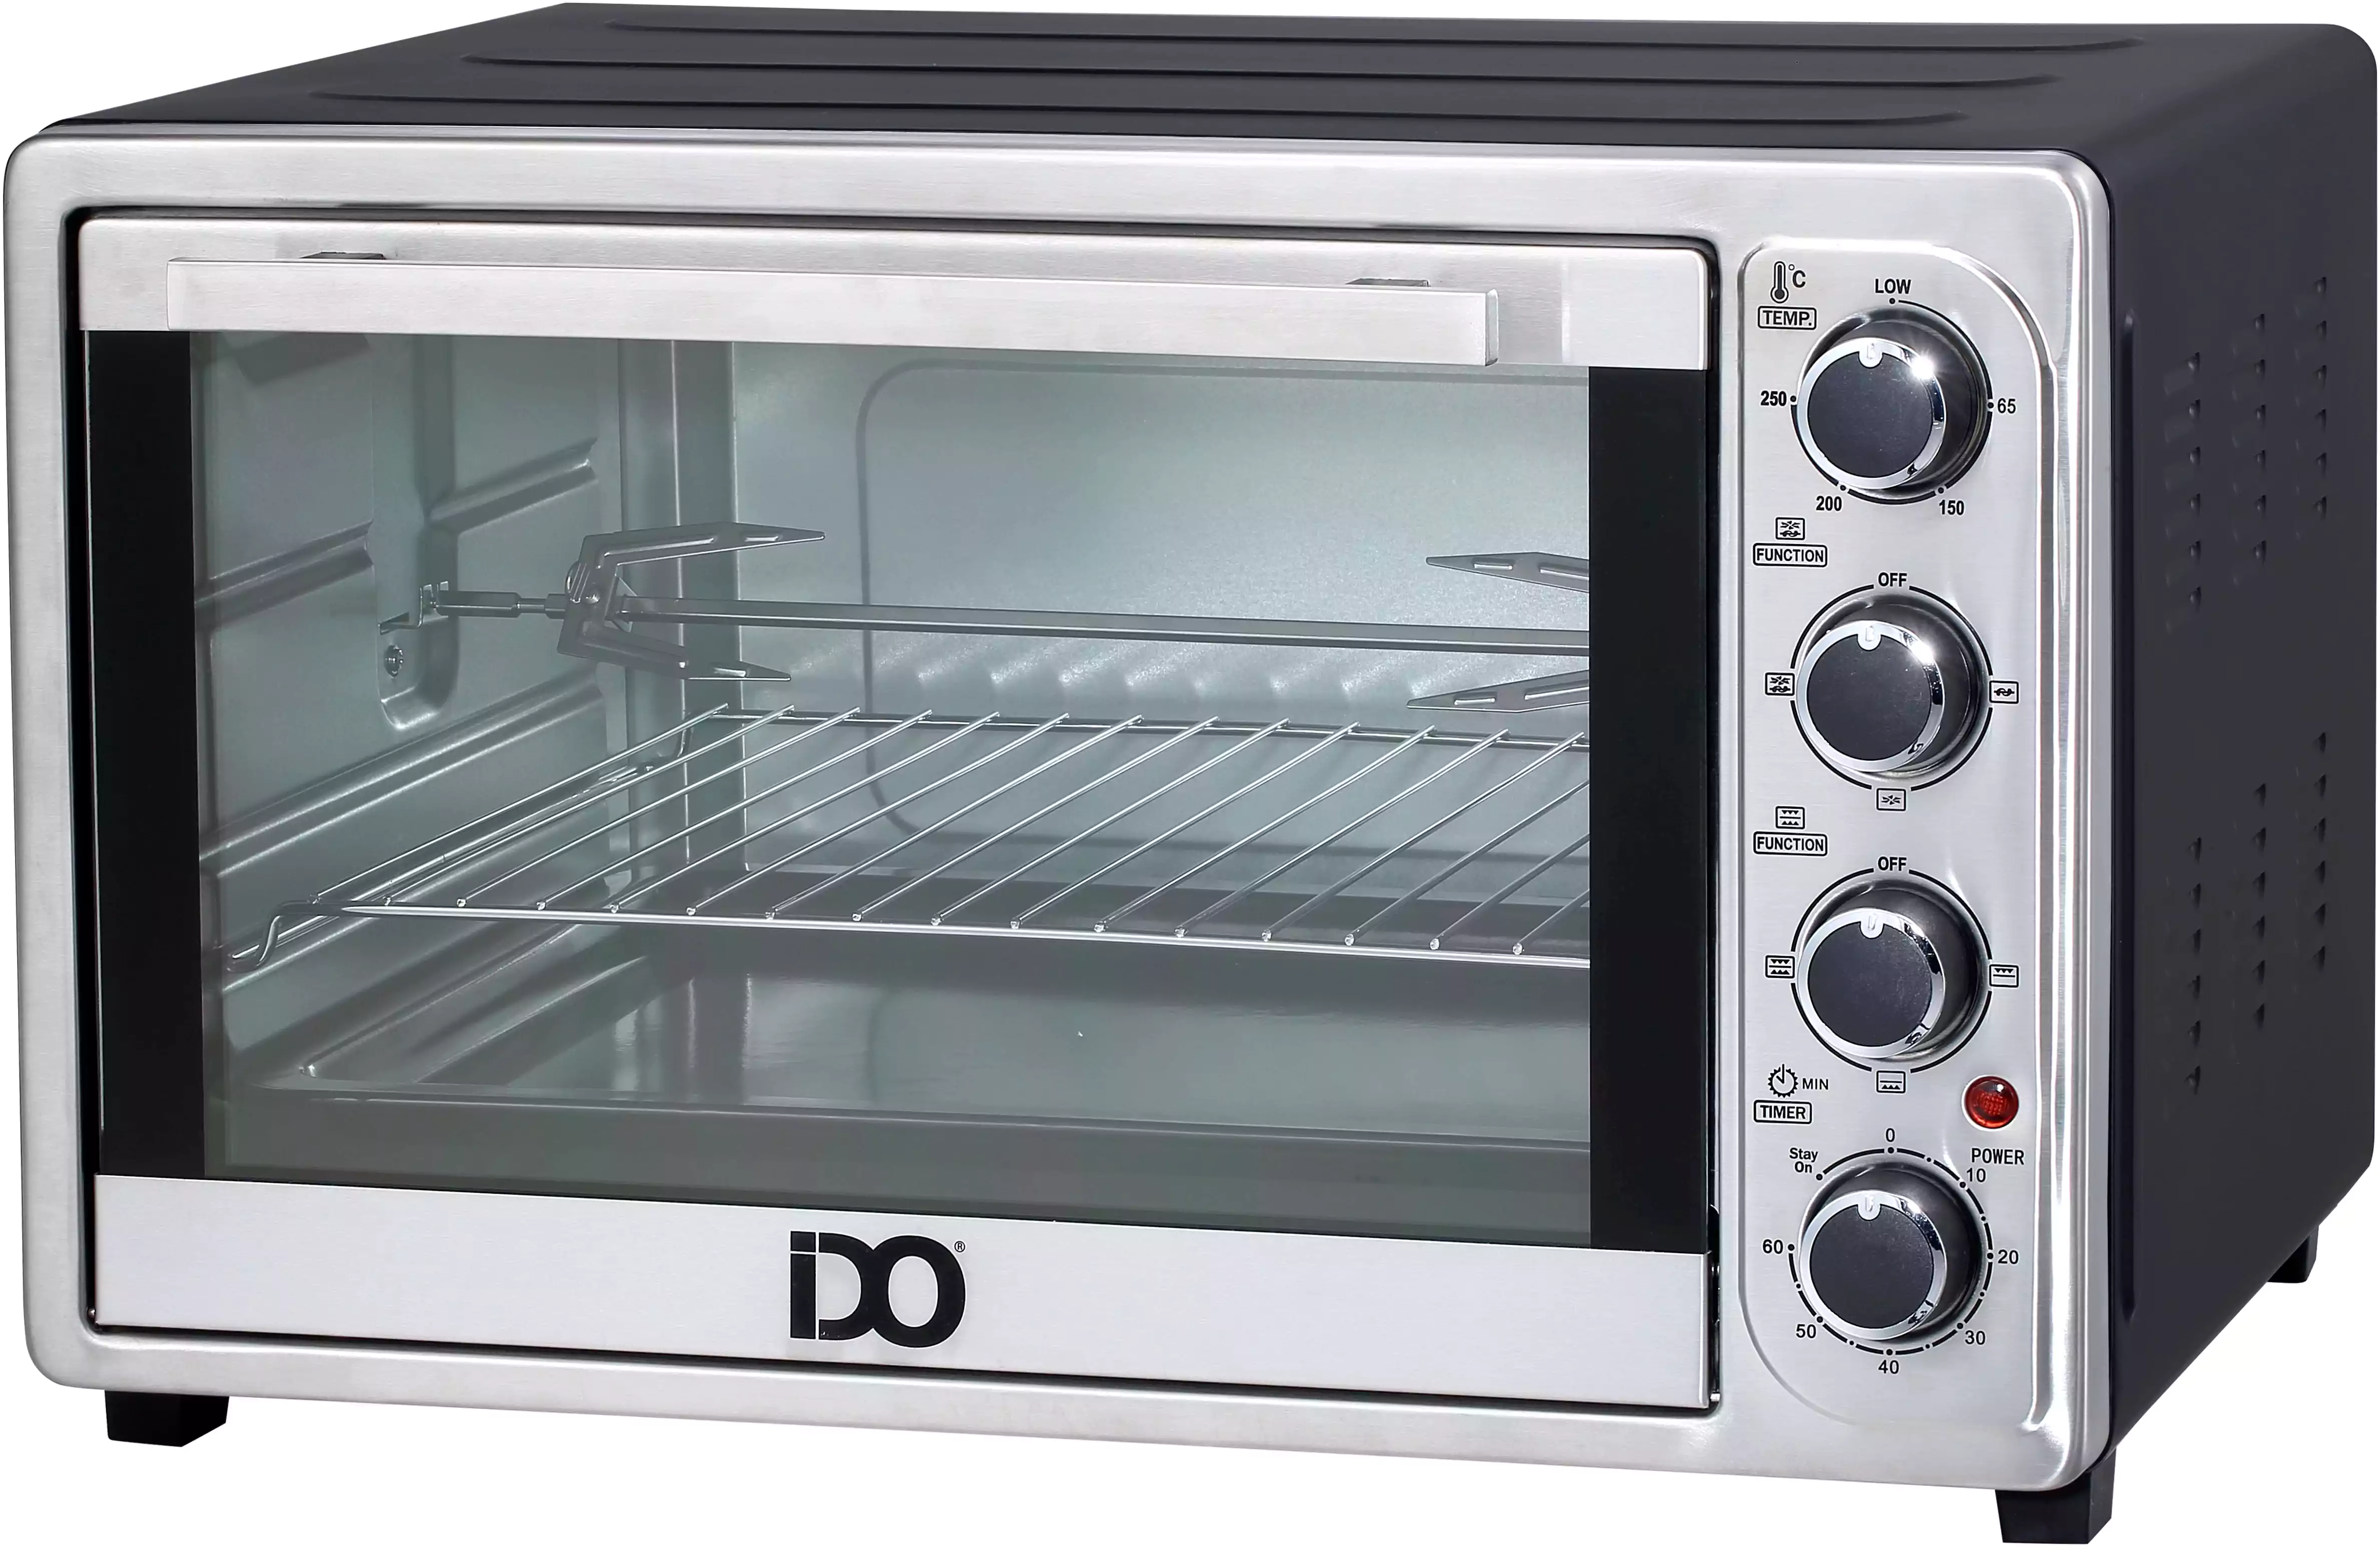 IDO Electric Oven 50 Liters with Grill and Fan, 2000 Watt, Silver TO50DG-SV